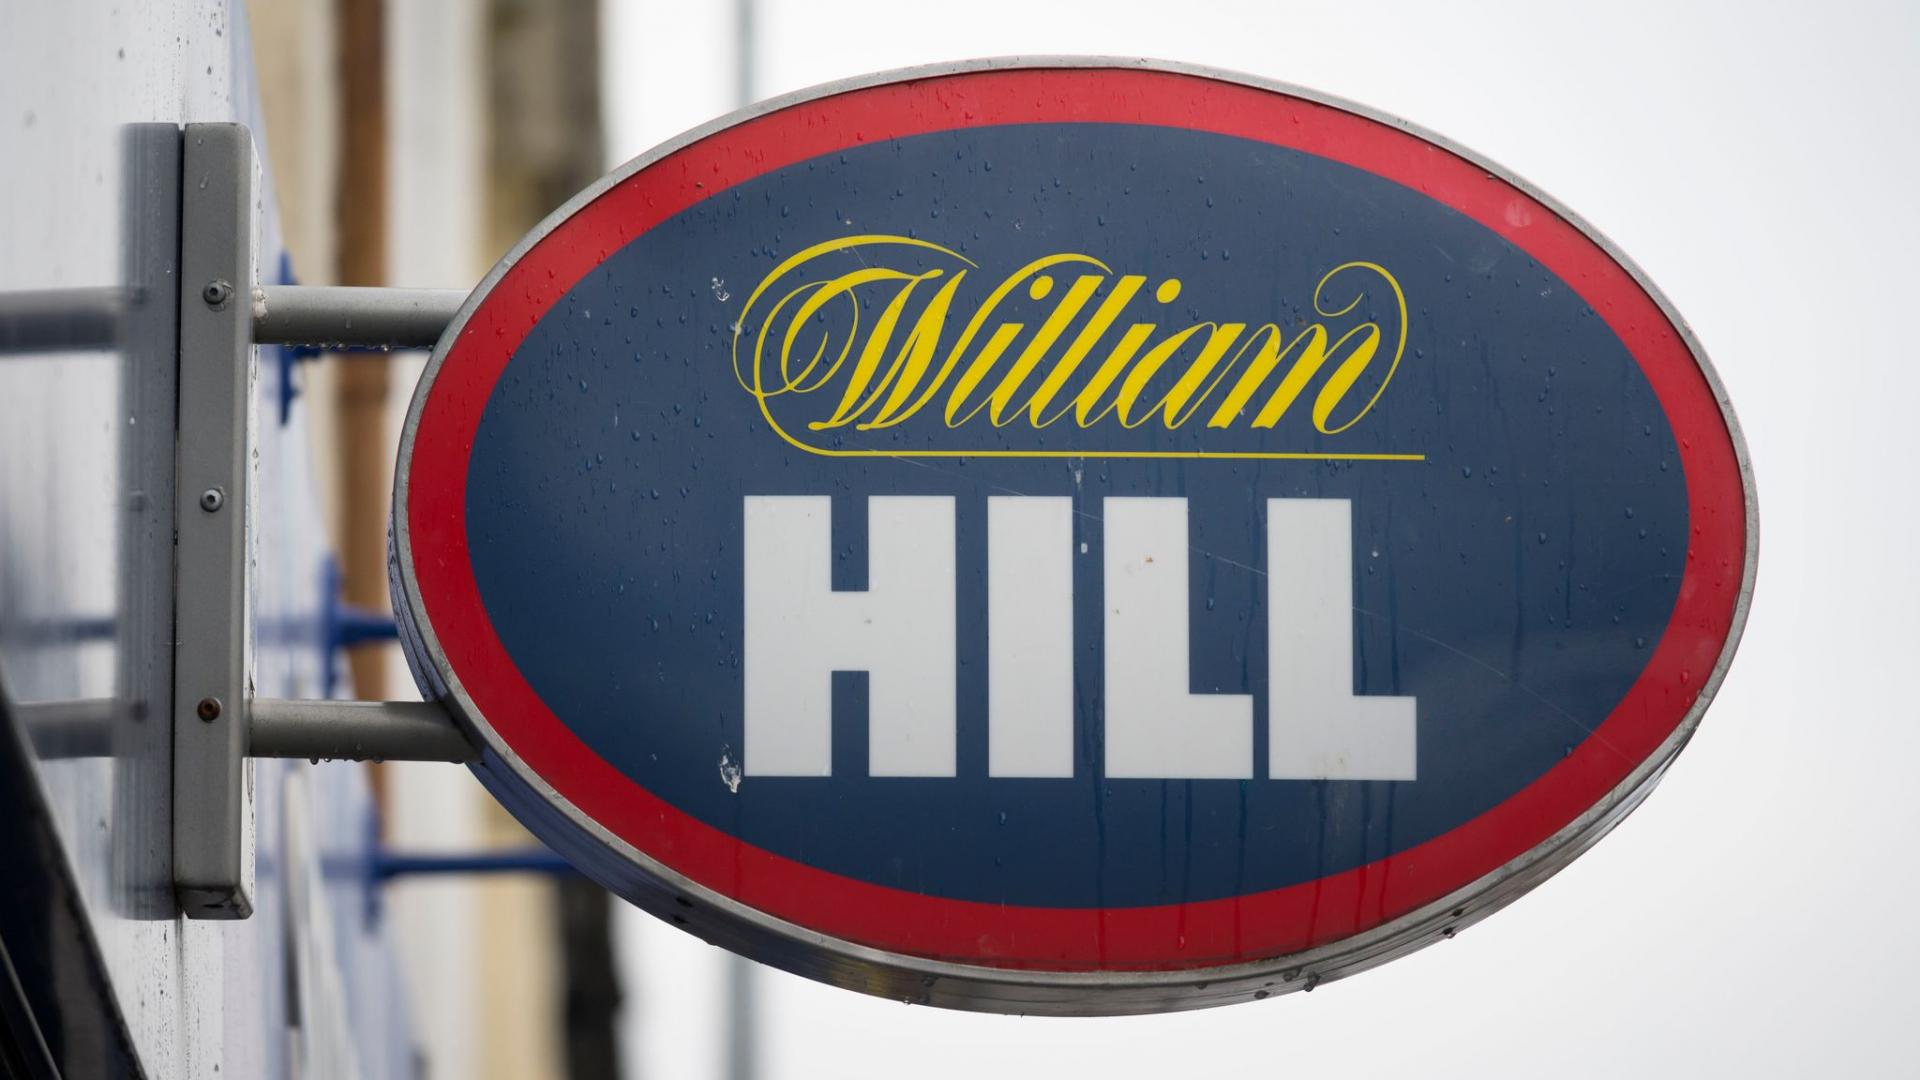 William Hill betting chain up for sale